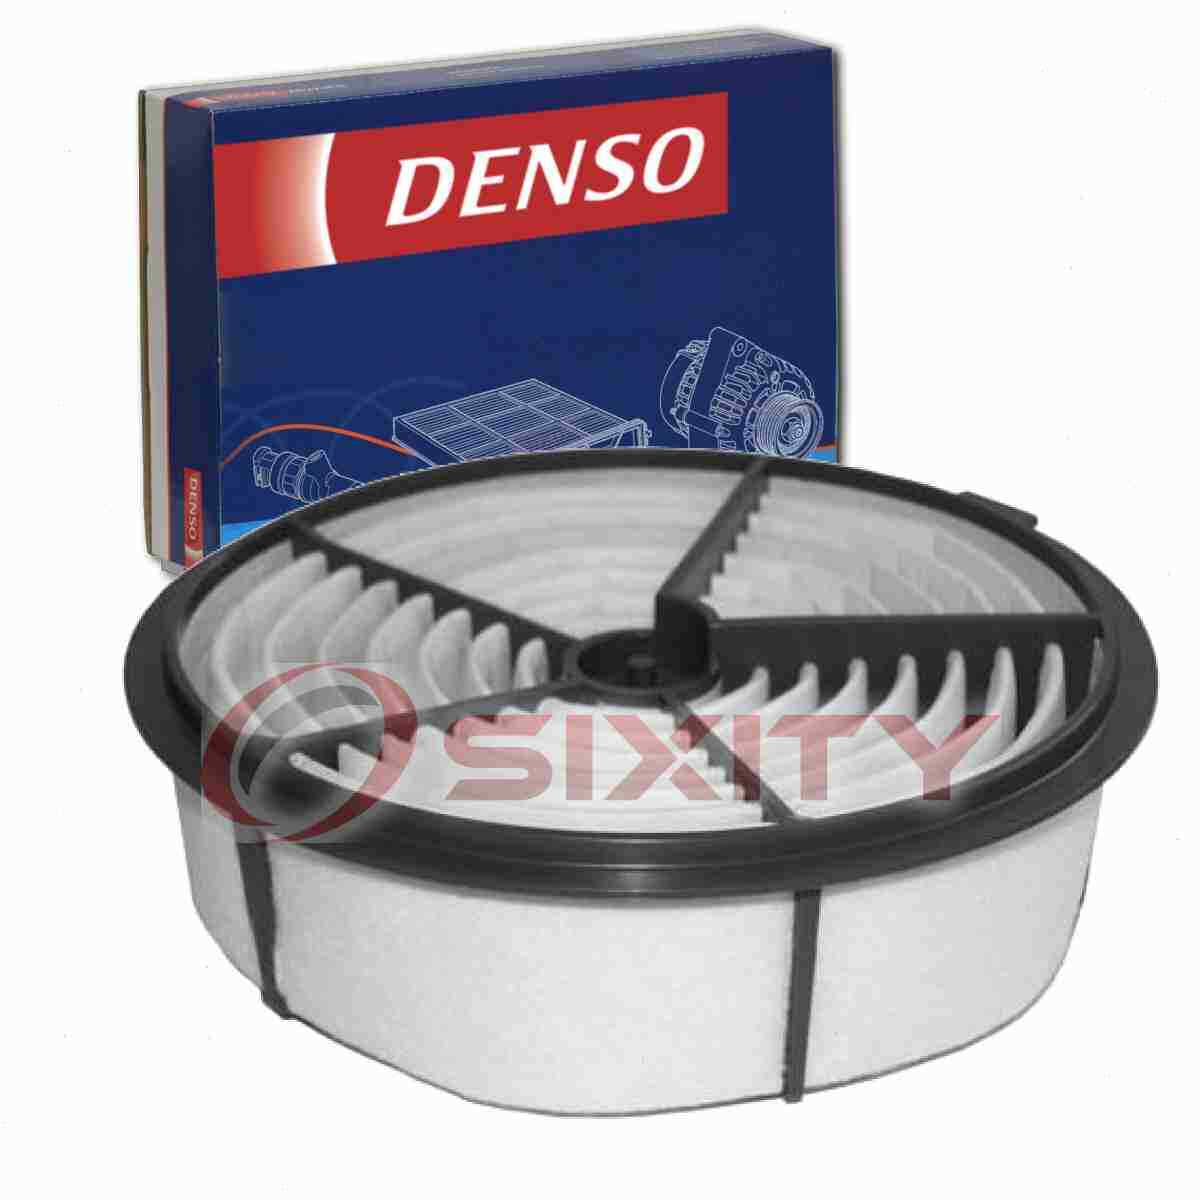 Denso Air Filter for 2012-2015 Scion iQ 1.3L L4 Intake Inlet Manifold Fuel zr